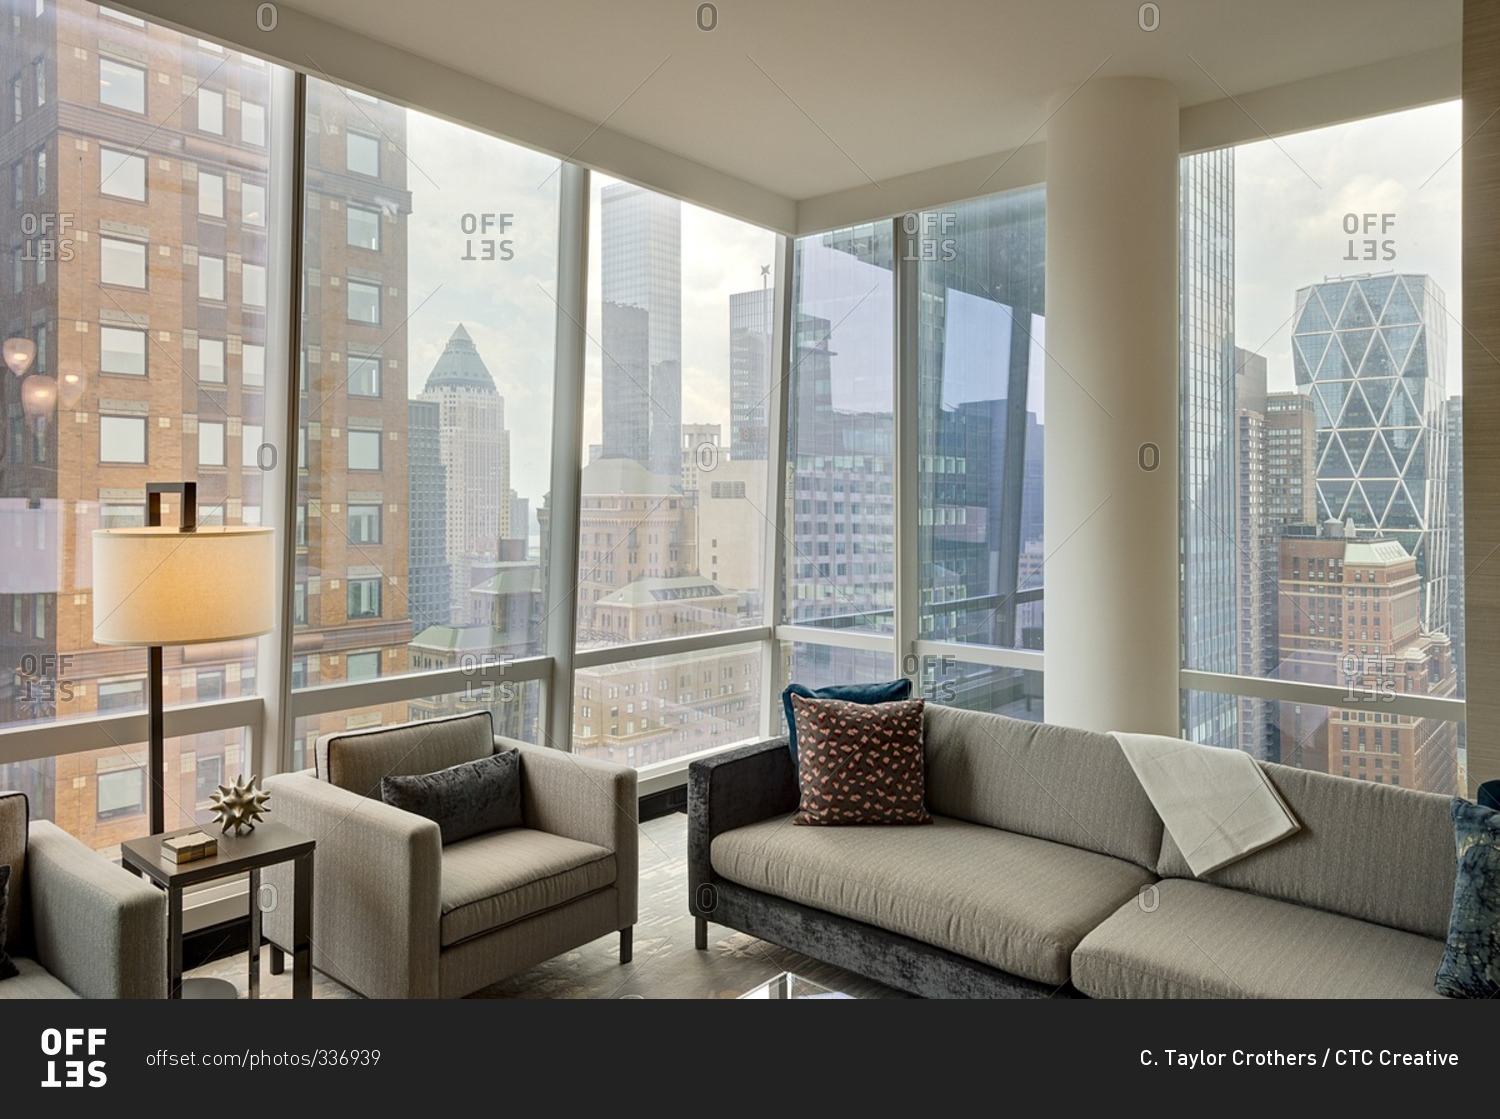 New York, NY - July 27, 2015: Luxurious living room with view of